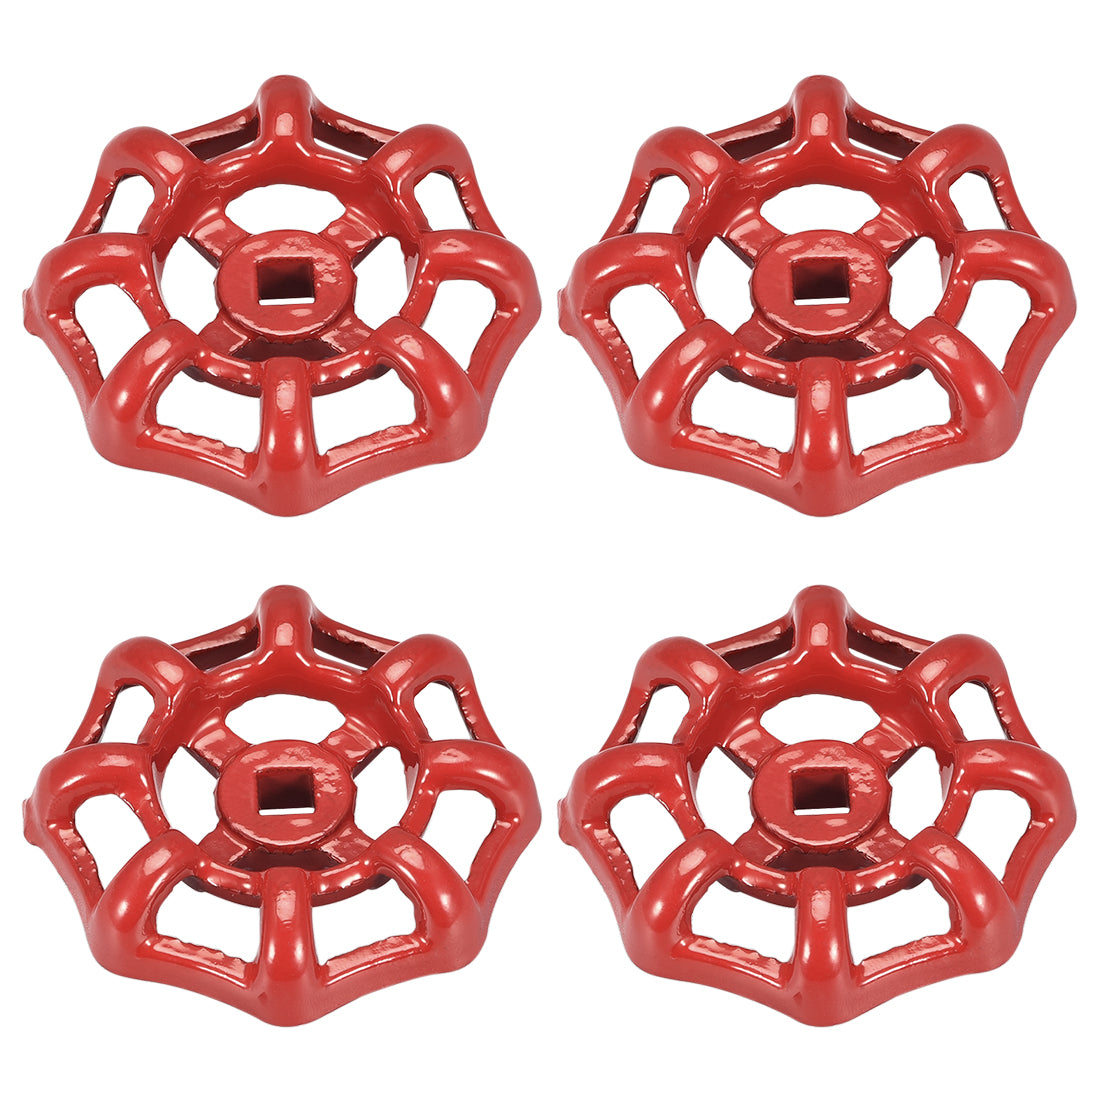 Uxcell Uxcell Round Wheel Handle, Square Broach 7x7mm, Wheel OD 63mm Paint Cast Steel Red 4Pcs